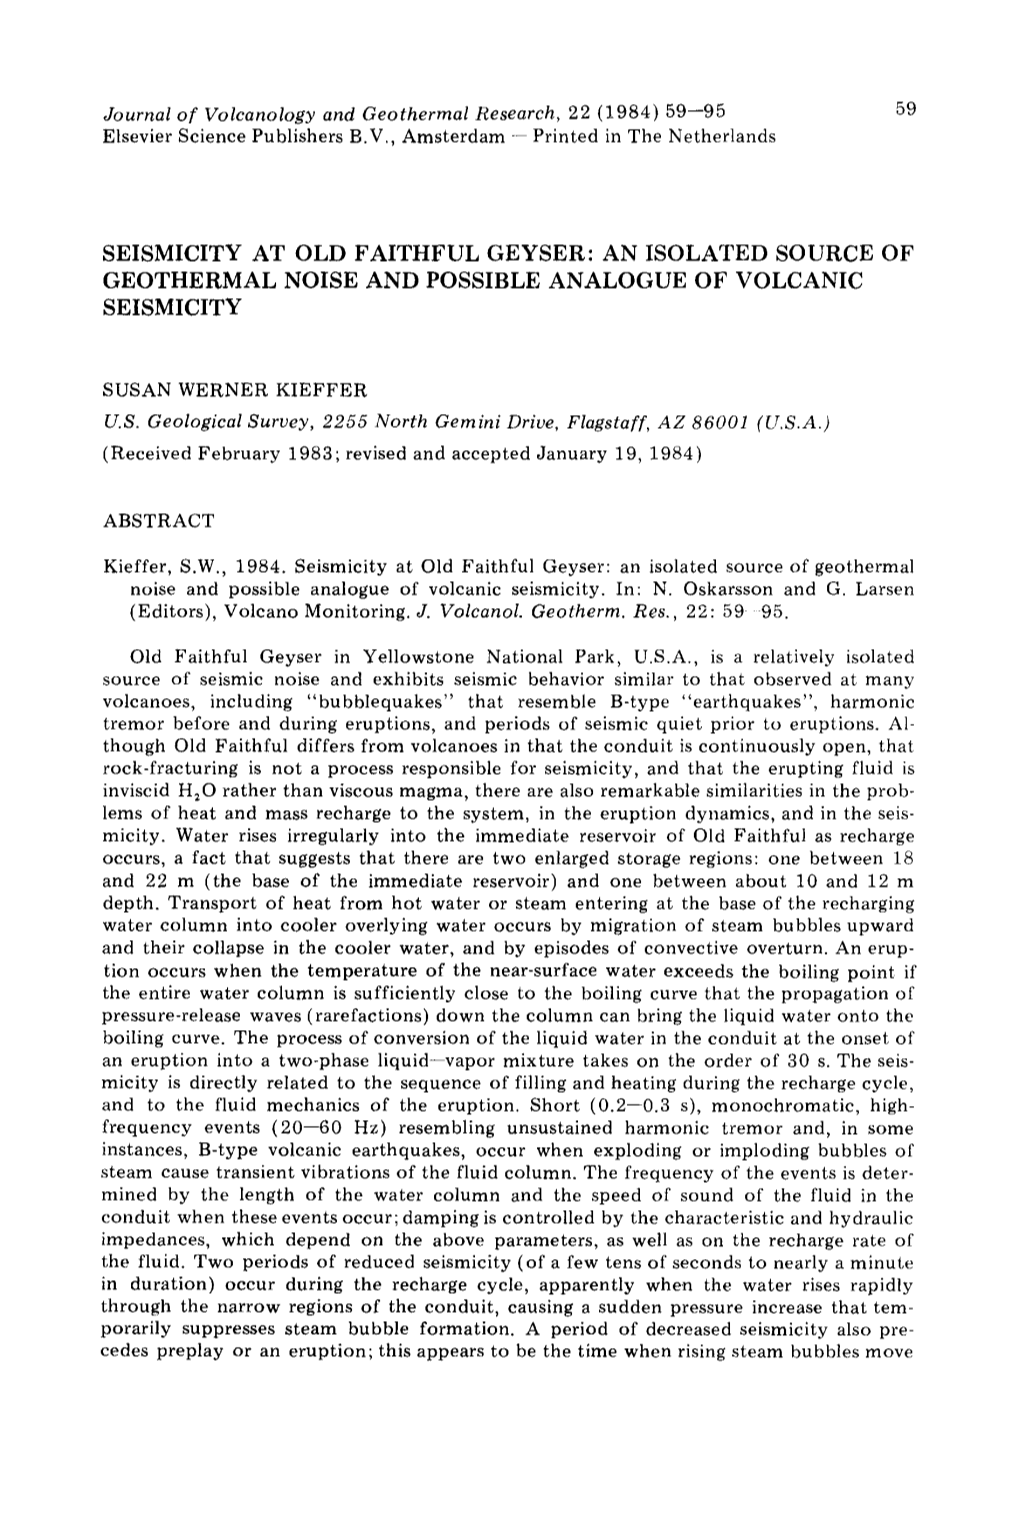 Journal of Volcanology and Geothermal Research, 22 (1984) 59--95 59 Elsevier Science Publishers B.V., Amsterdam -- Printed in the Netherlands